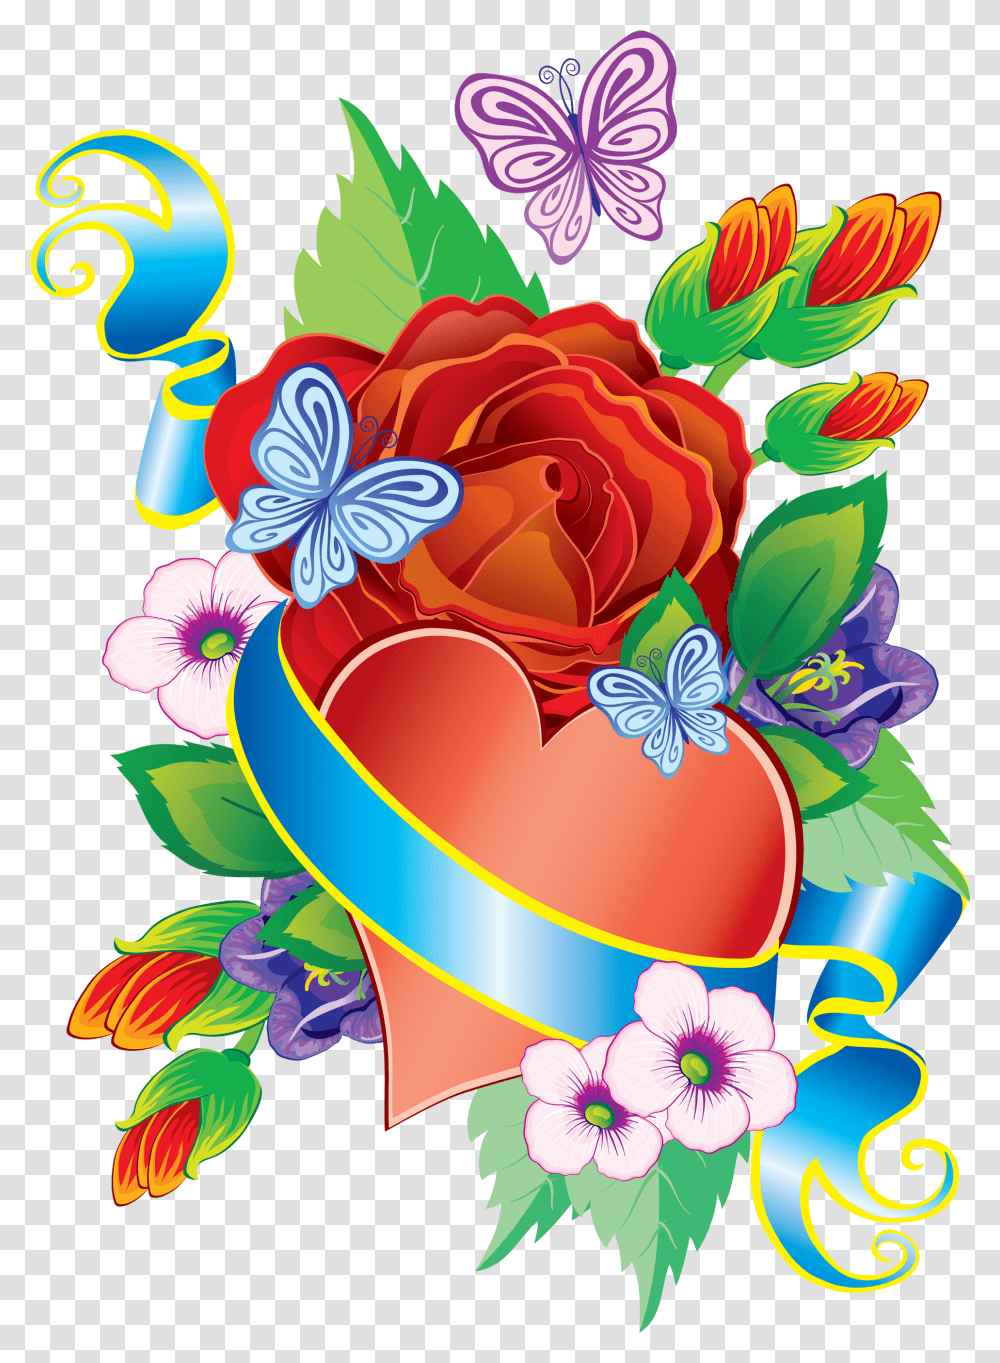 Heart And Flowers Decorative Element Decorative Flowers And Hearts, Floral Design, Pattern Transparent Png